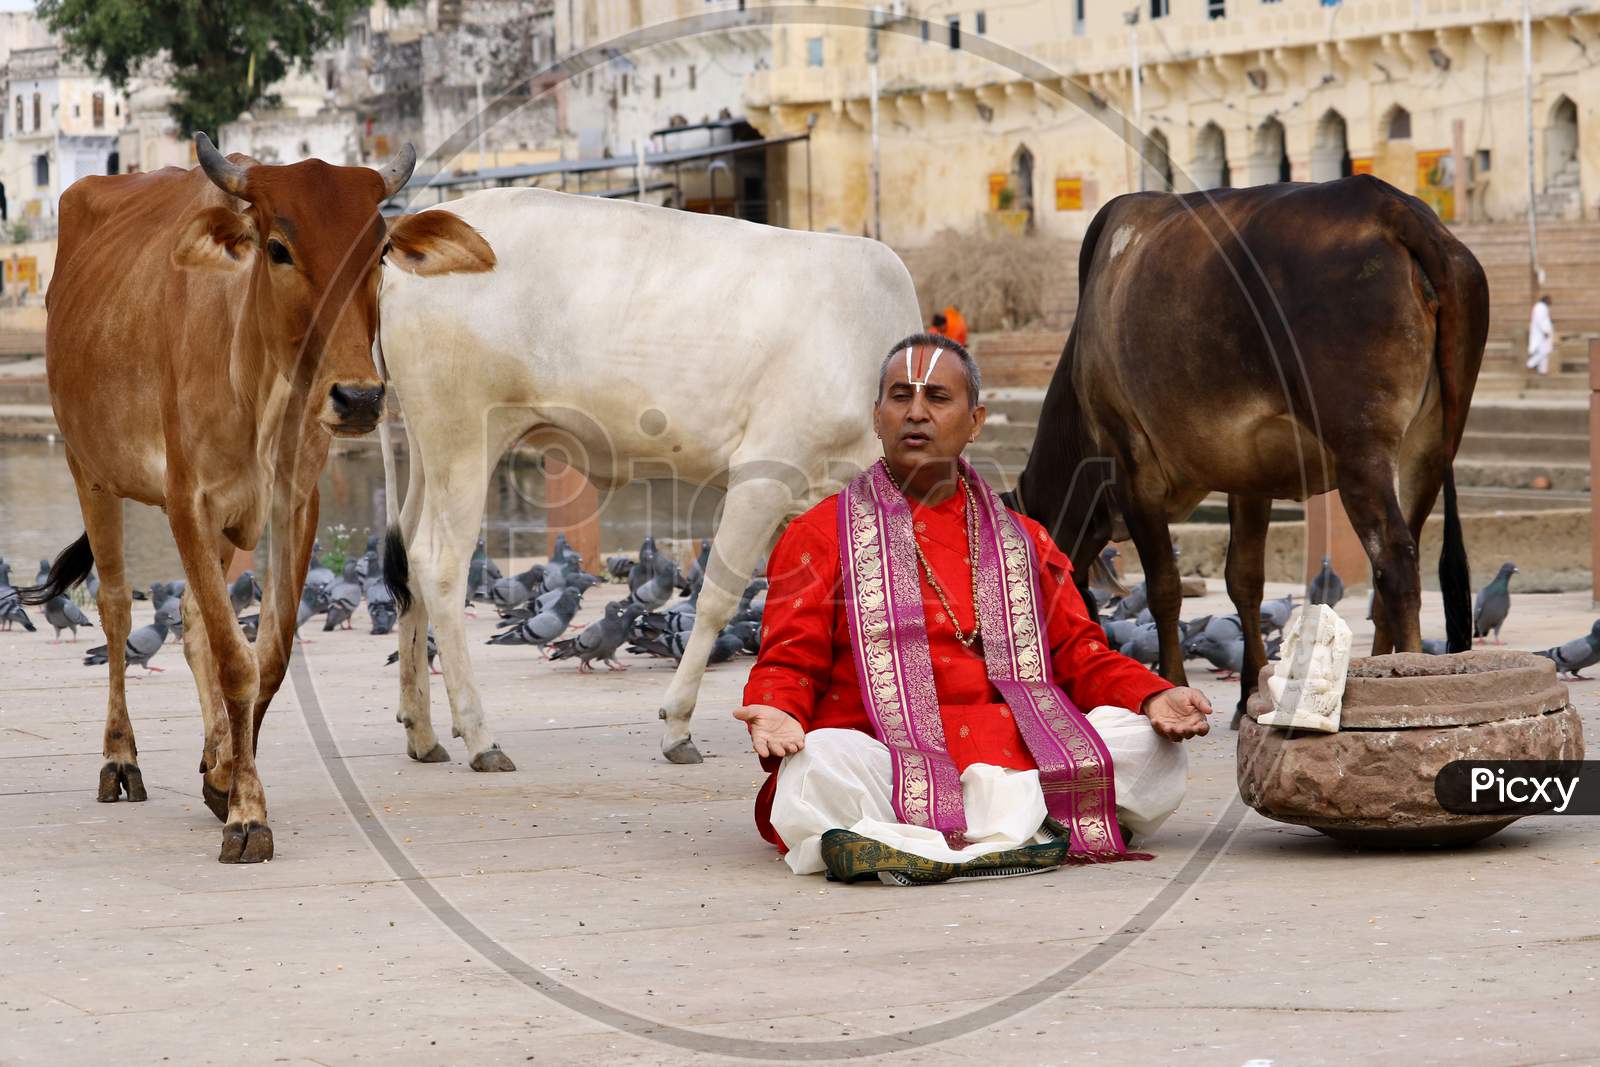 Hindu priest offer prayers on the occasion of "Guru Purunima" on the shores of the Holy Lake of Pushkar, Rajasthan on July 05, 2020